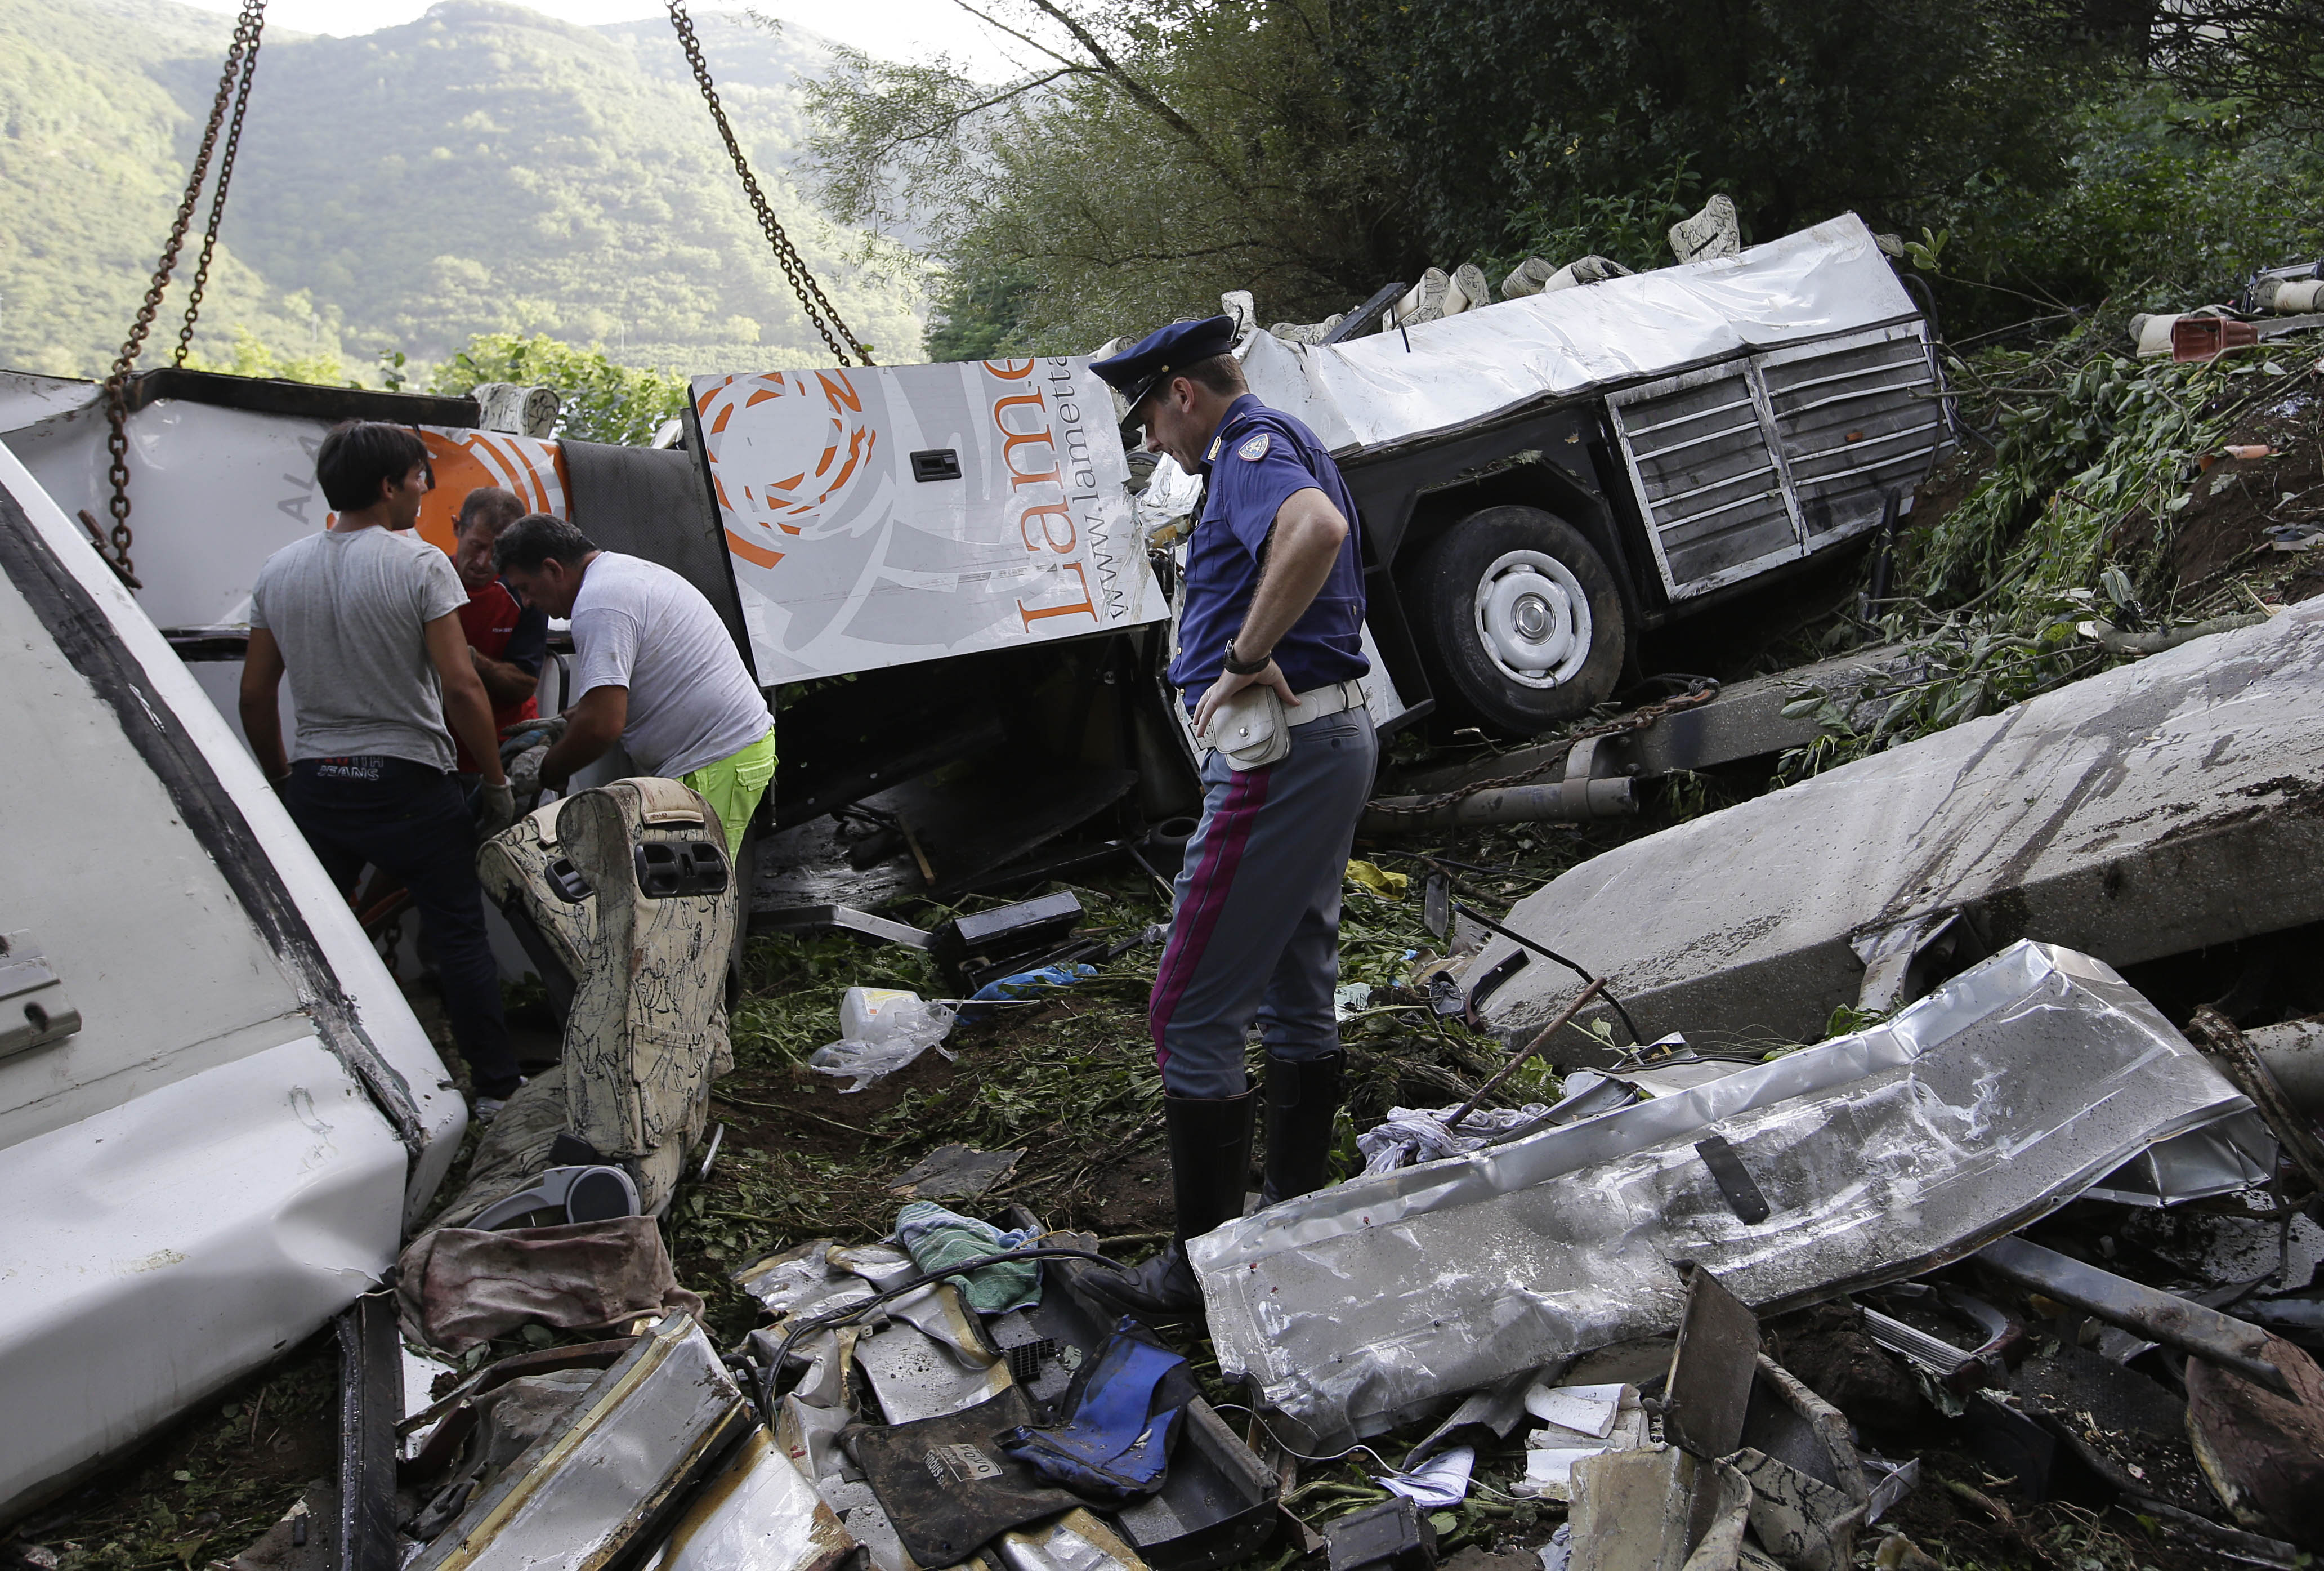 A Carabiniere police officer looks at the wreckage of a bus which crashed near Avellino. Photo: AP